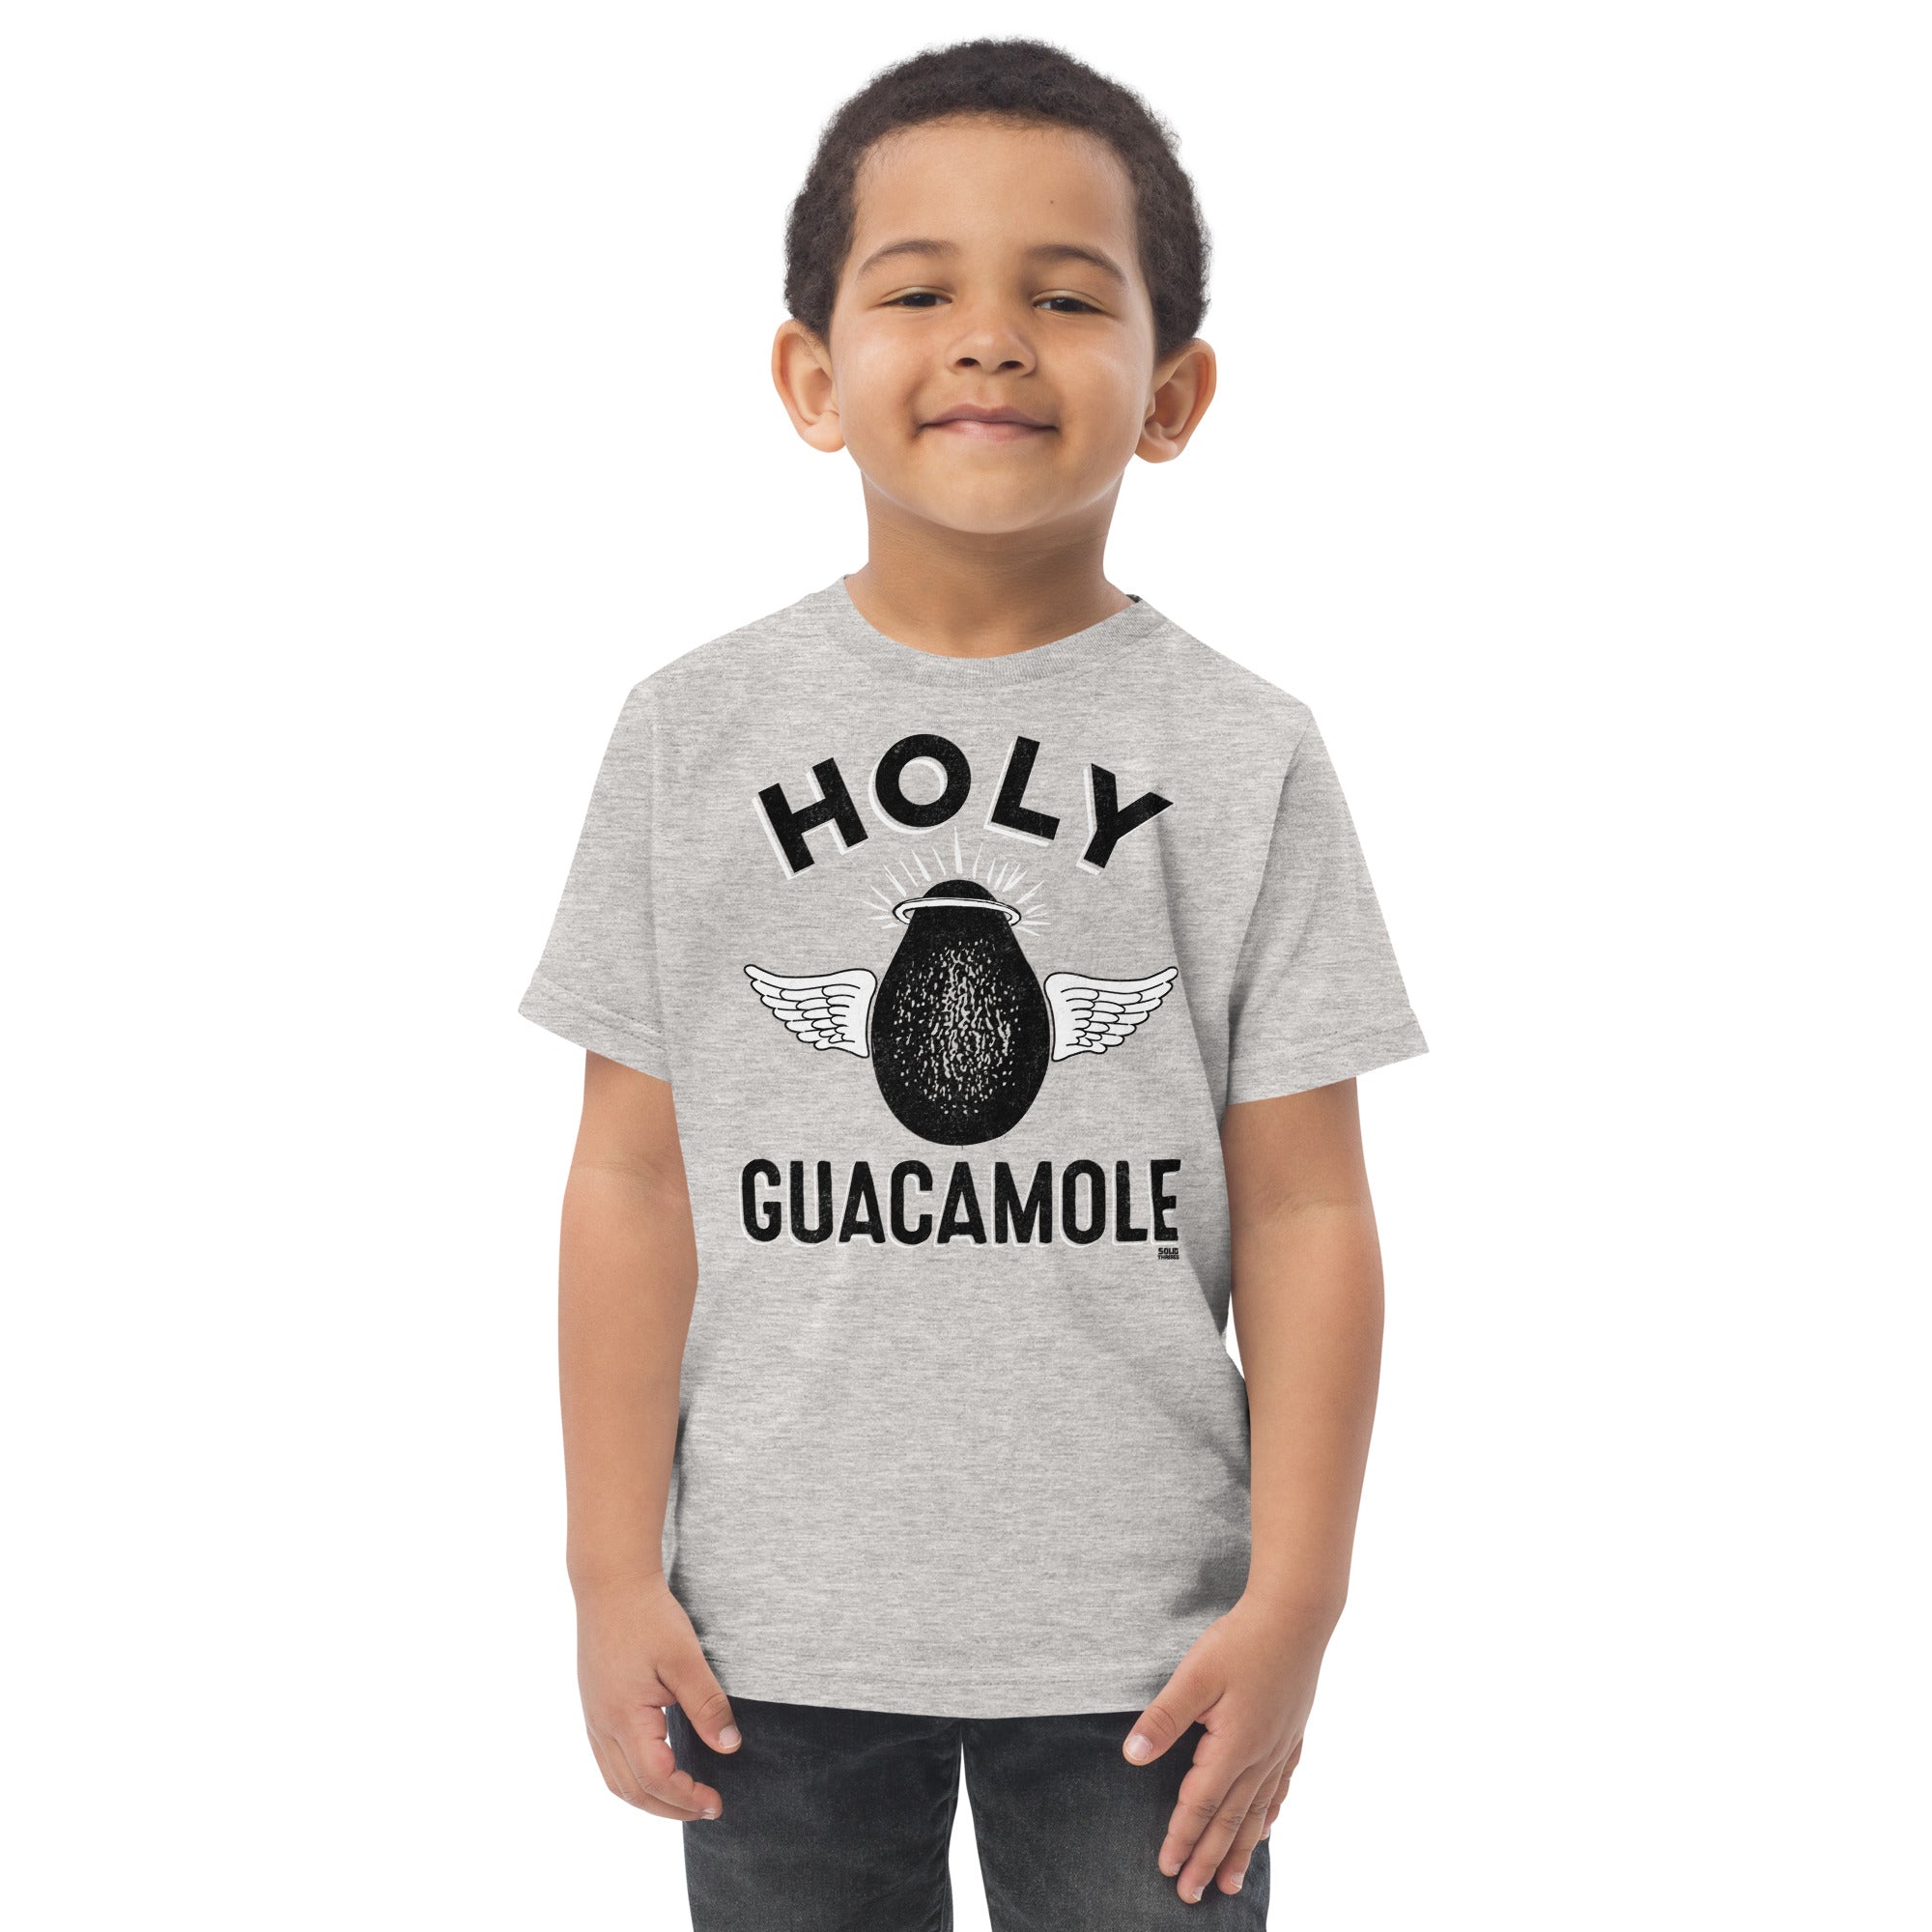 Toddler's Holy Guacamole Retro Food Extra Soft T-Shirt | Funny Avocado Tee | Solid Threads